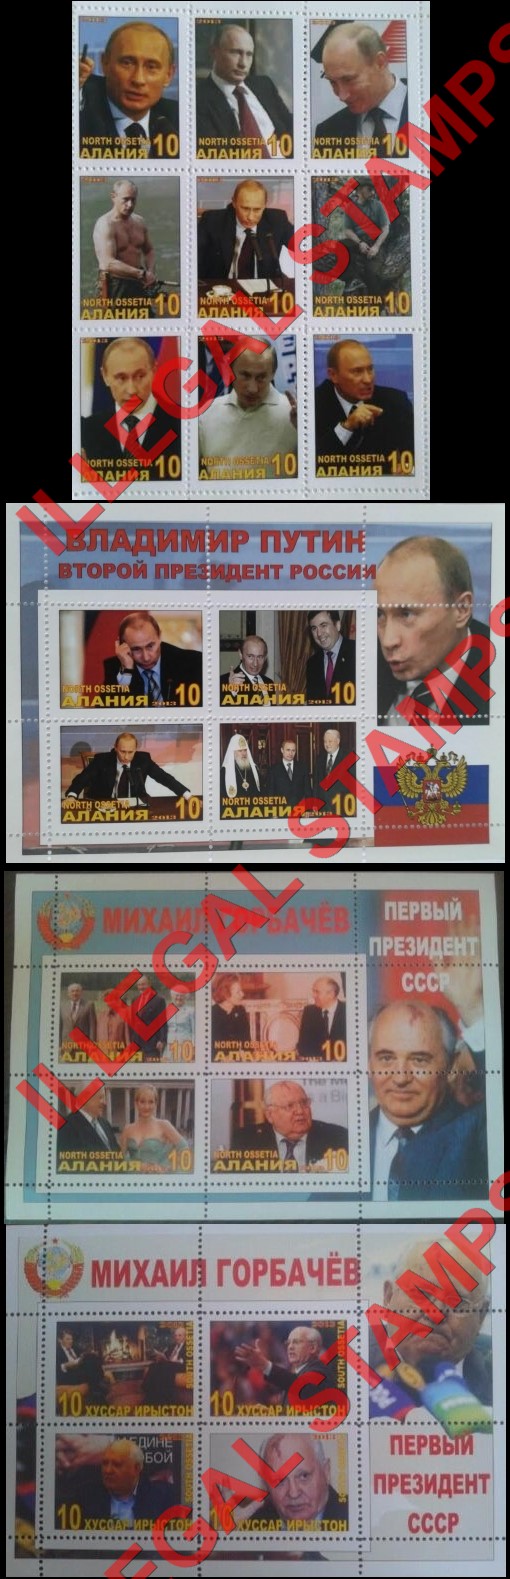 North Ossetia 2013 Counterfeit Illegal Stamps